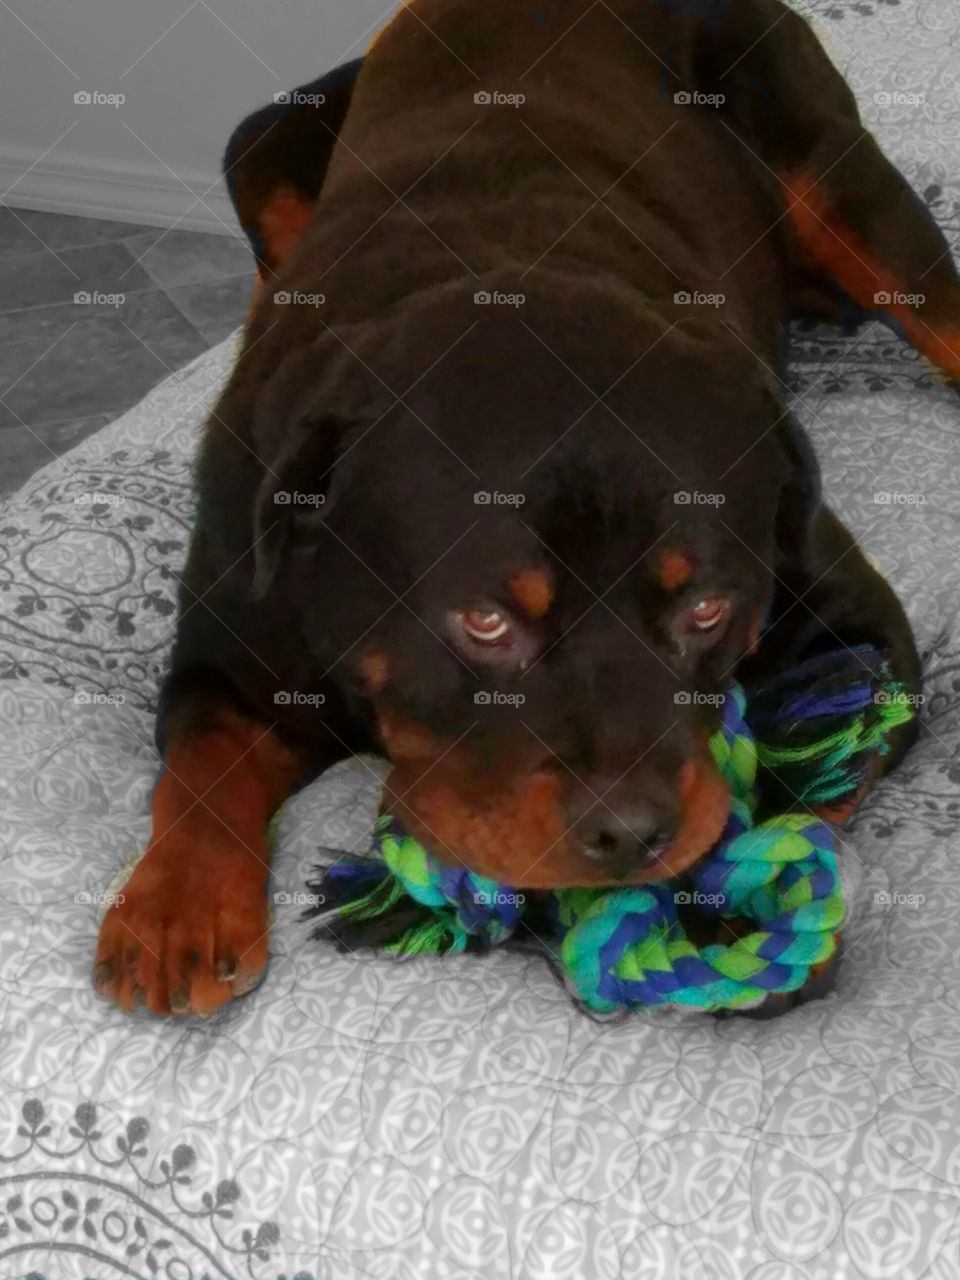 Rottweiler with toy